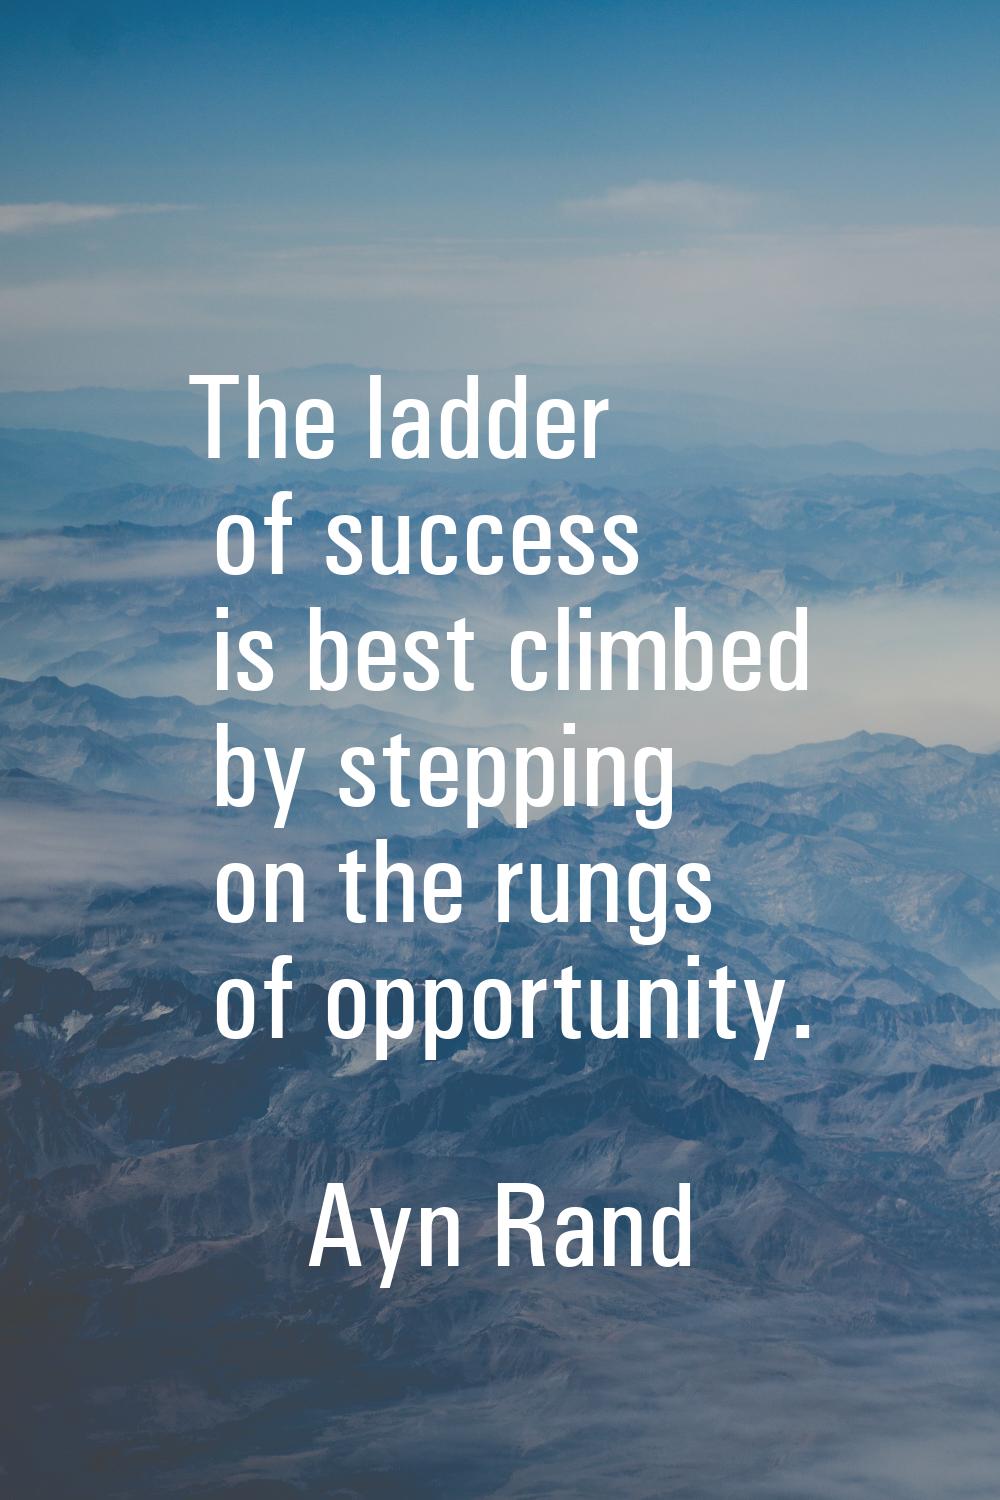 The ladder of success is best climbed by stepping on the rungs of opportunity.